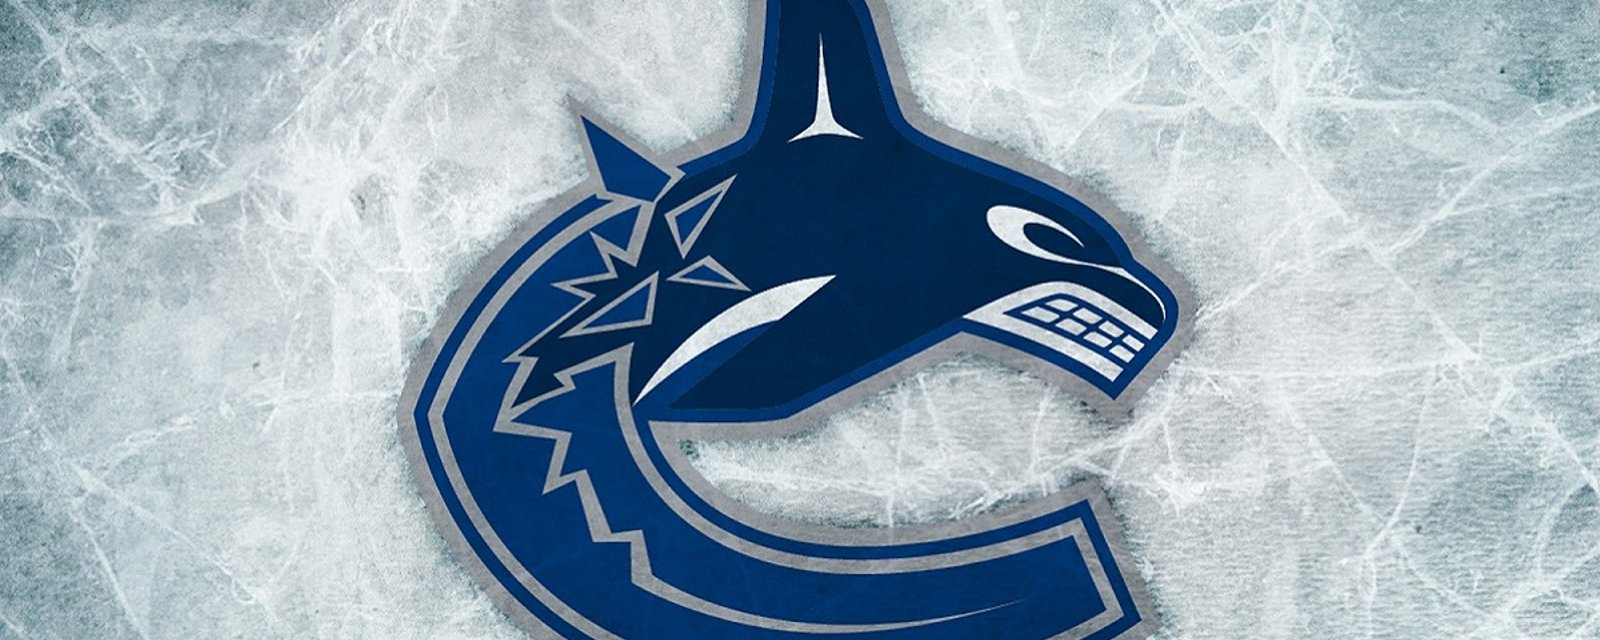 Canucks drop a bad news surprise on fans over the weekend.